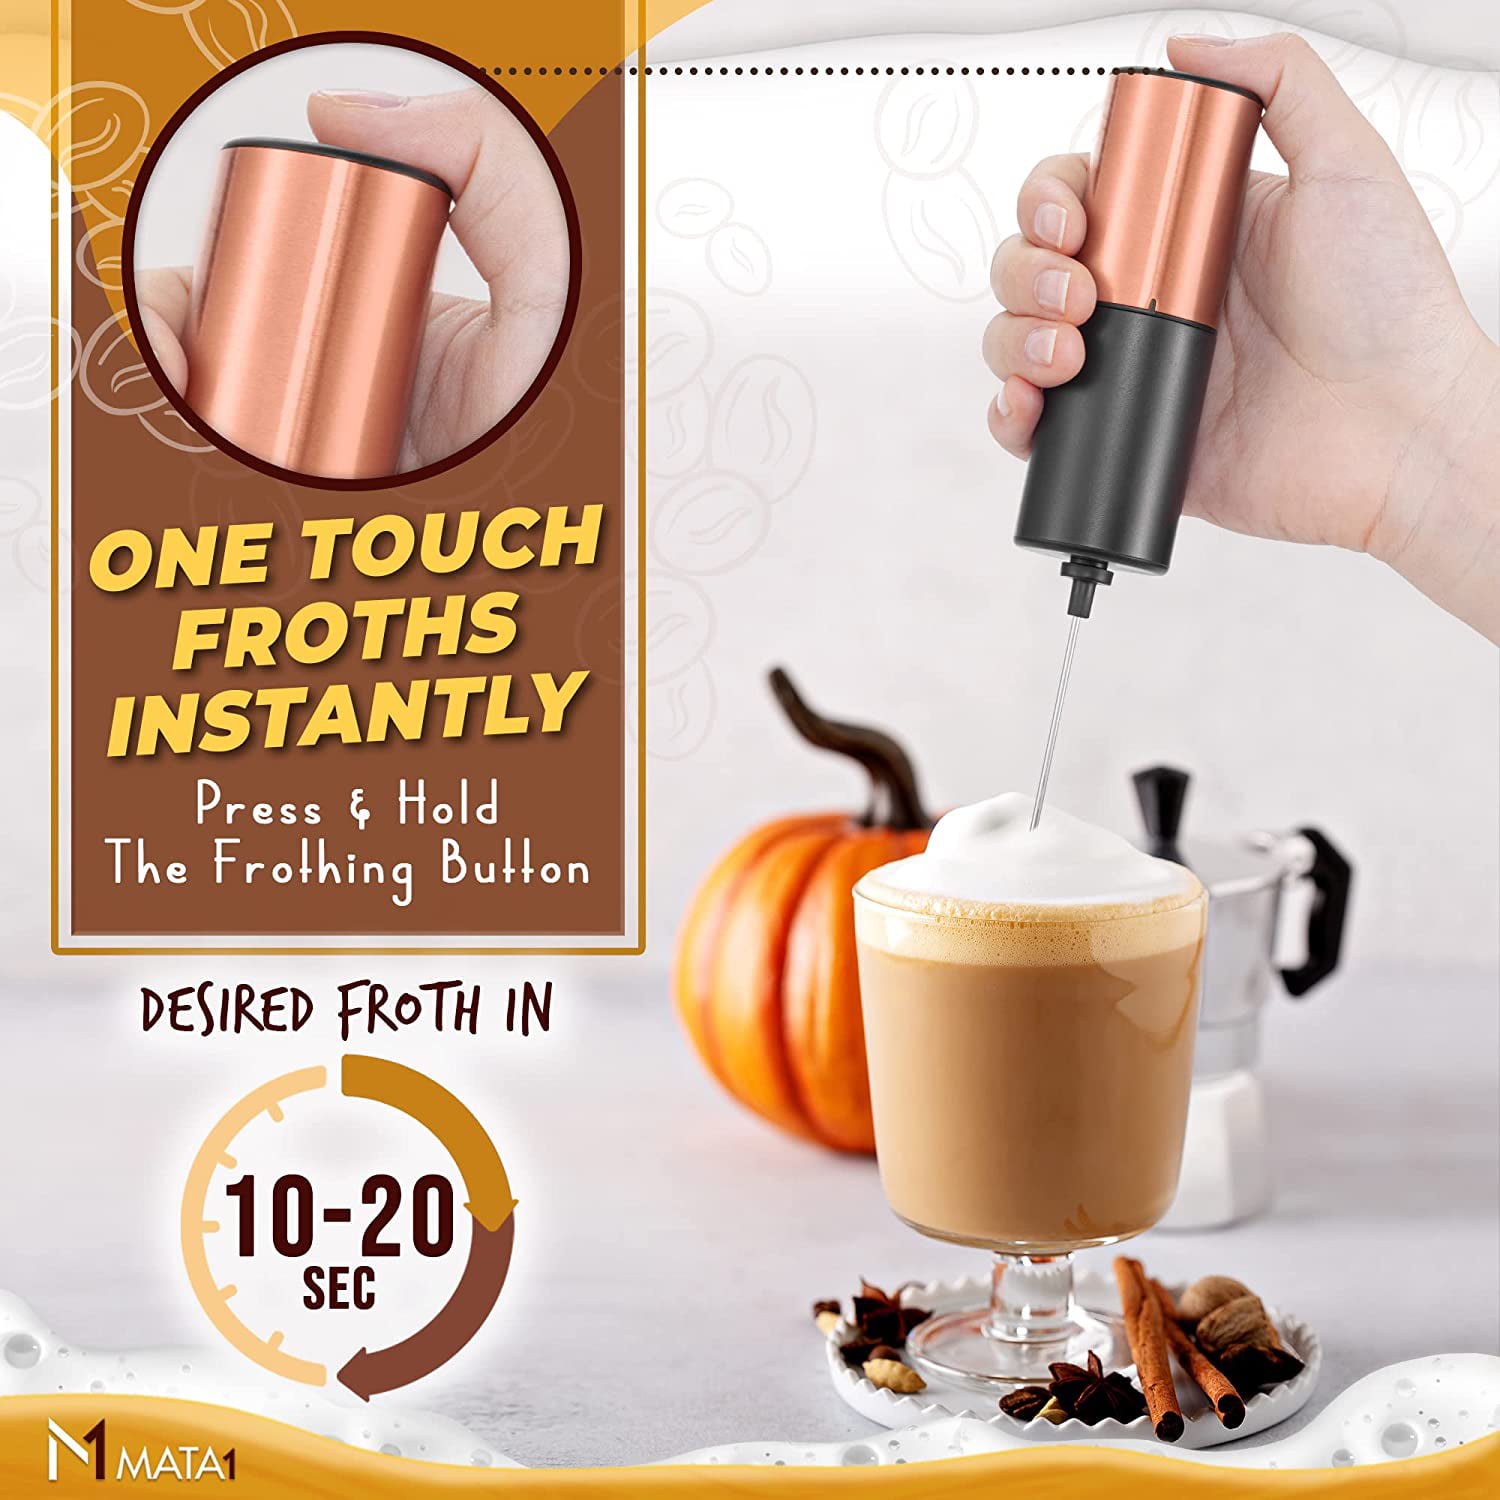 FRANIKAI Handheld Electric Milk Frother for Coffee with Stand